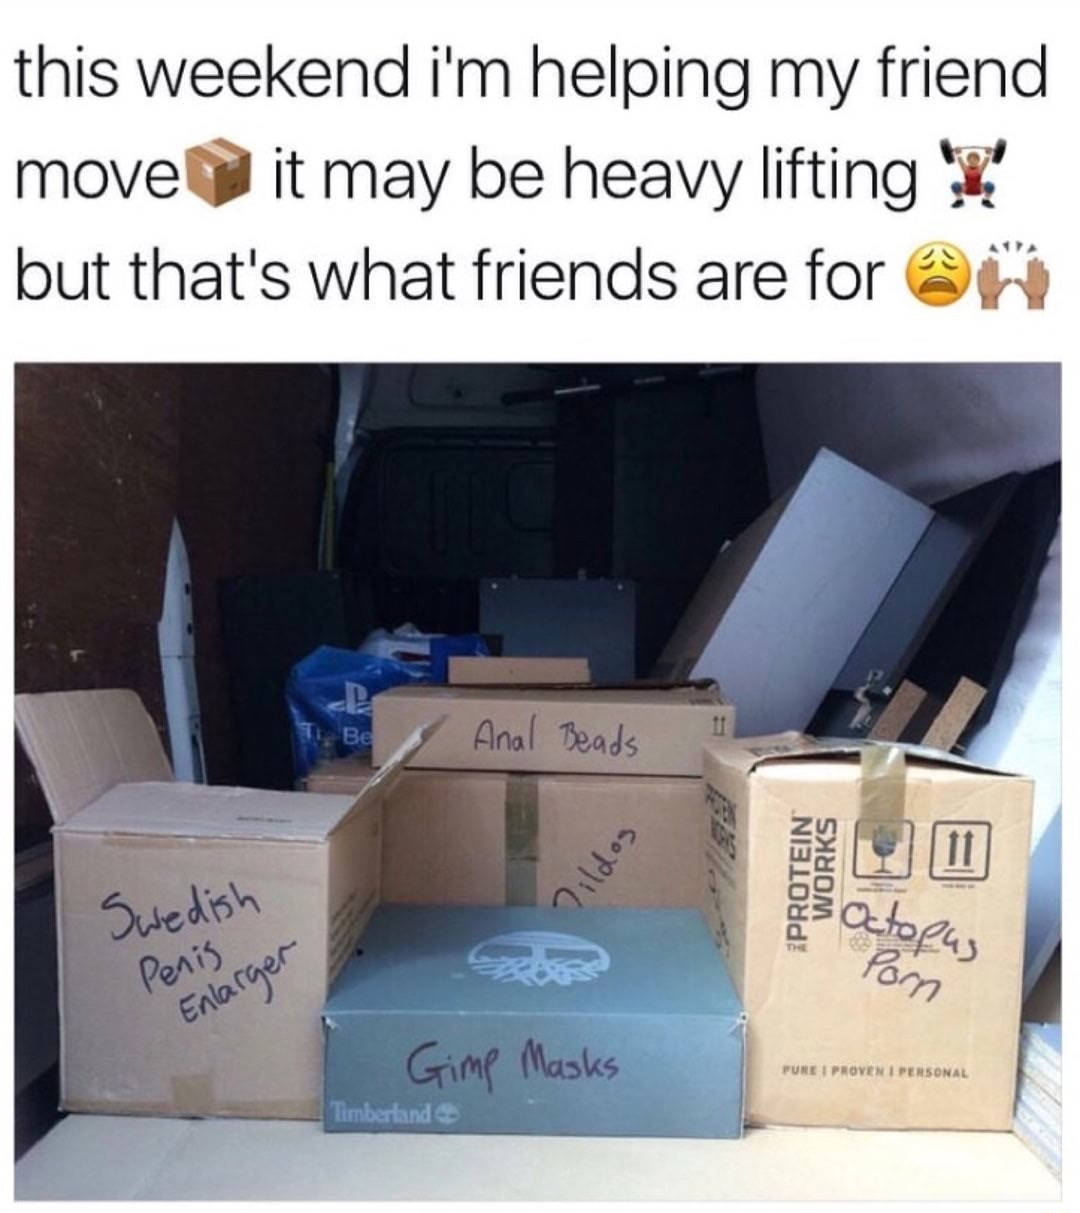 help a friend move meme funny - this weekend i'm helping my friend move it may be heavy lifting ? but that's what friends are for Be Anal Beads Sopiil Protein Works Swedish Octopus Penis Porn Enlarger Gime Masks Pure I Proven I Personal Timberland